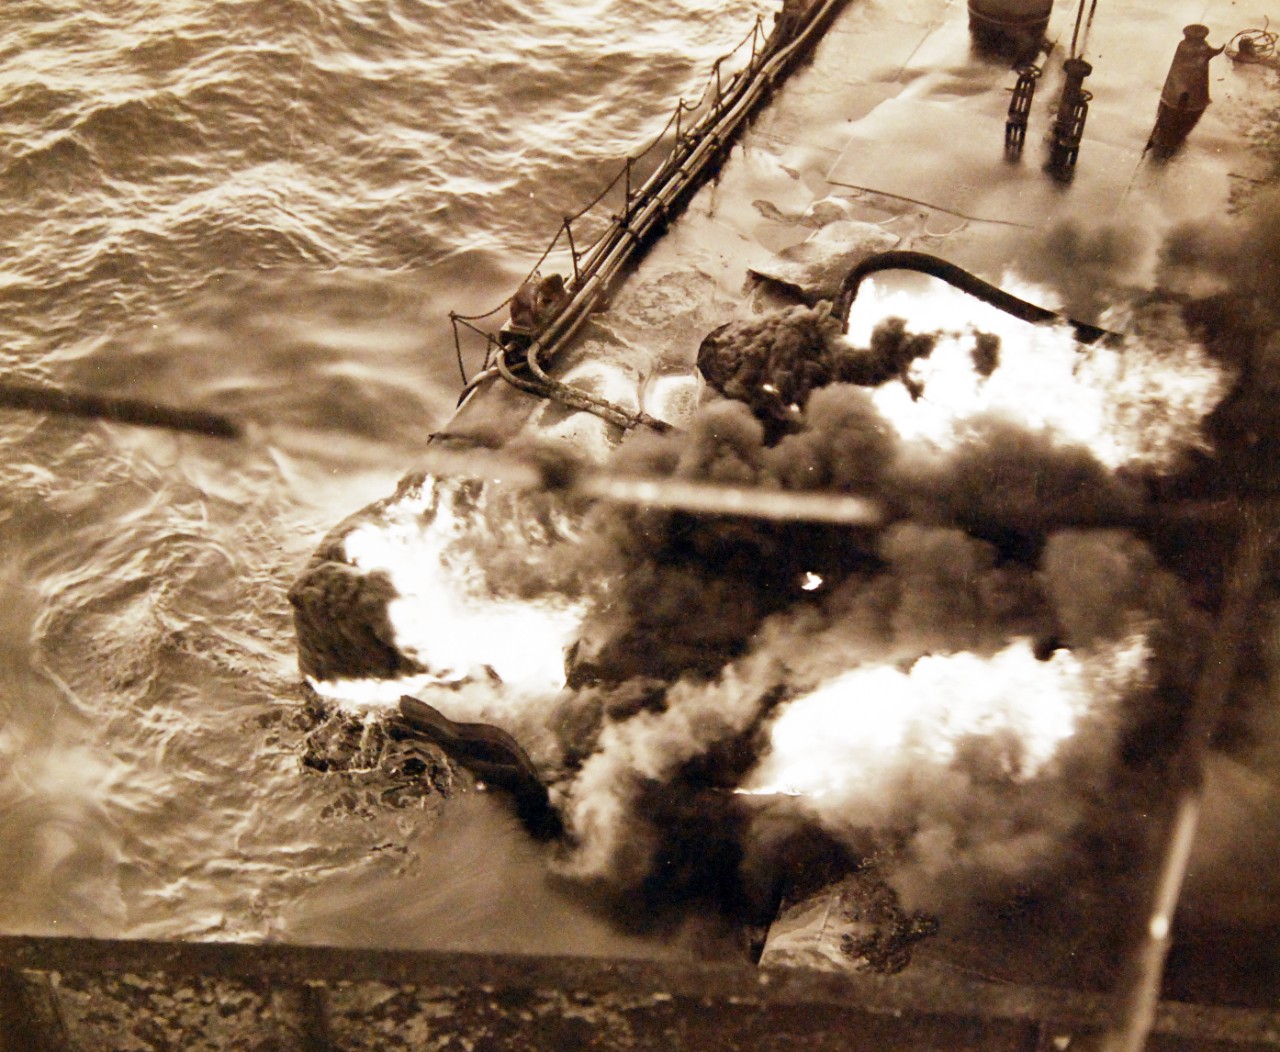 <p>80-G-61575: German U-boat attacks, WWII. SS Pennsylvania Sun burning after being torpedoed amidships by a torpedo by U-571 on July 15, 1942. Shown: Fire in torpedo hole.&nbsp;</p>
